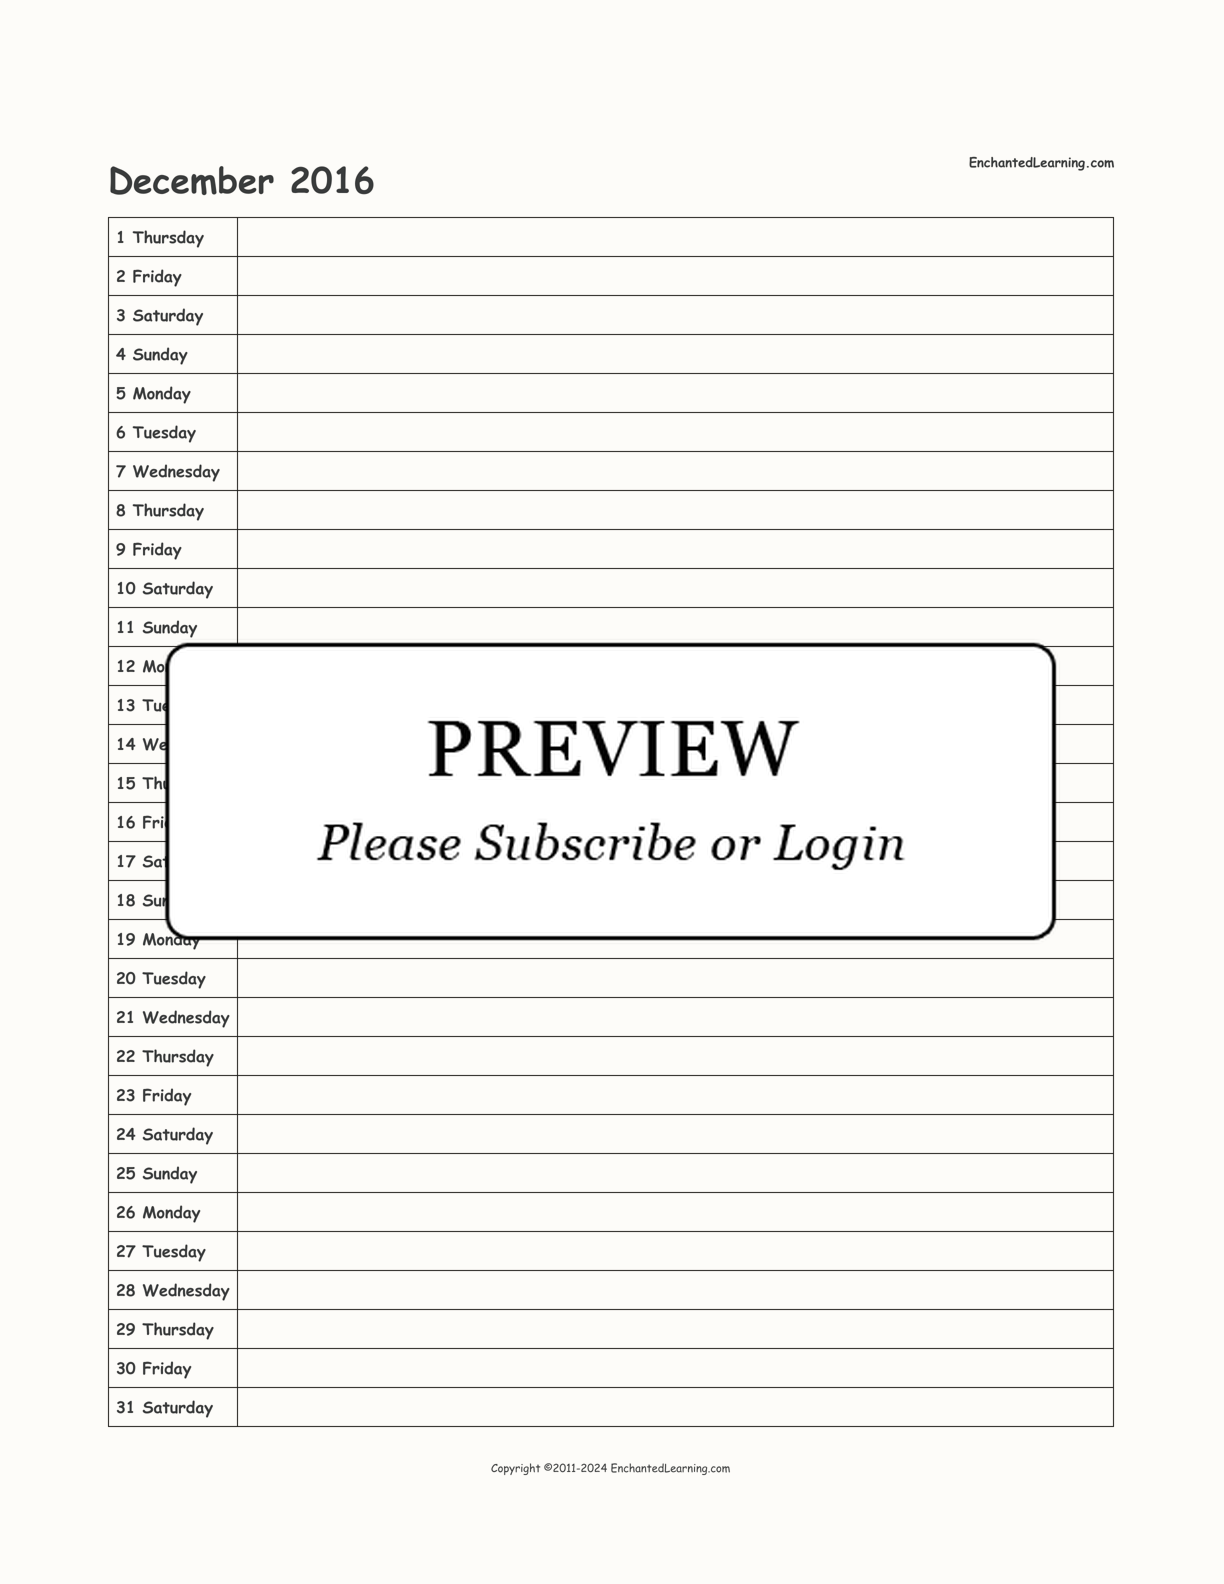 2016 Scheduling Calendar interactive printout page 12